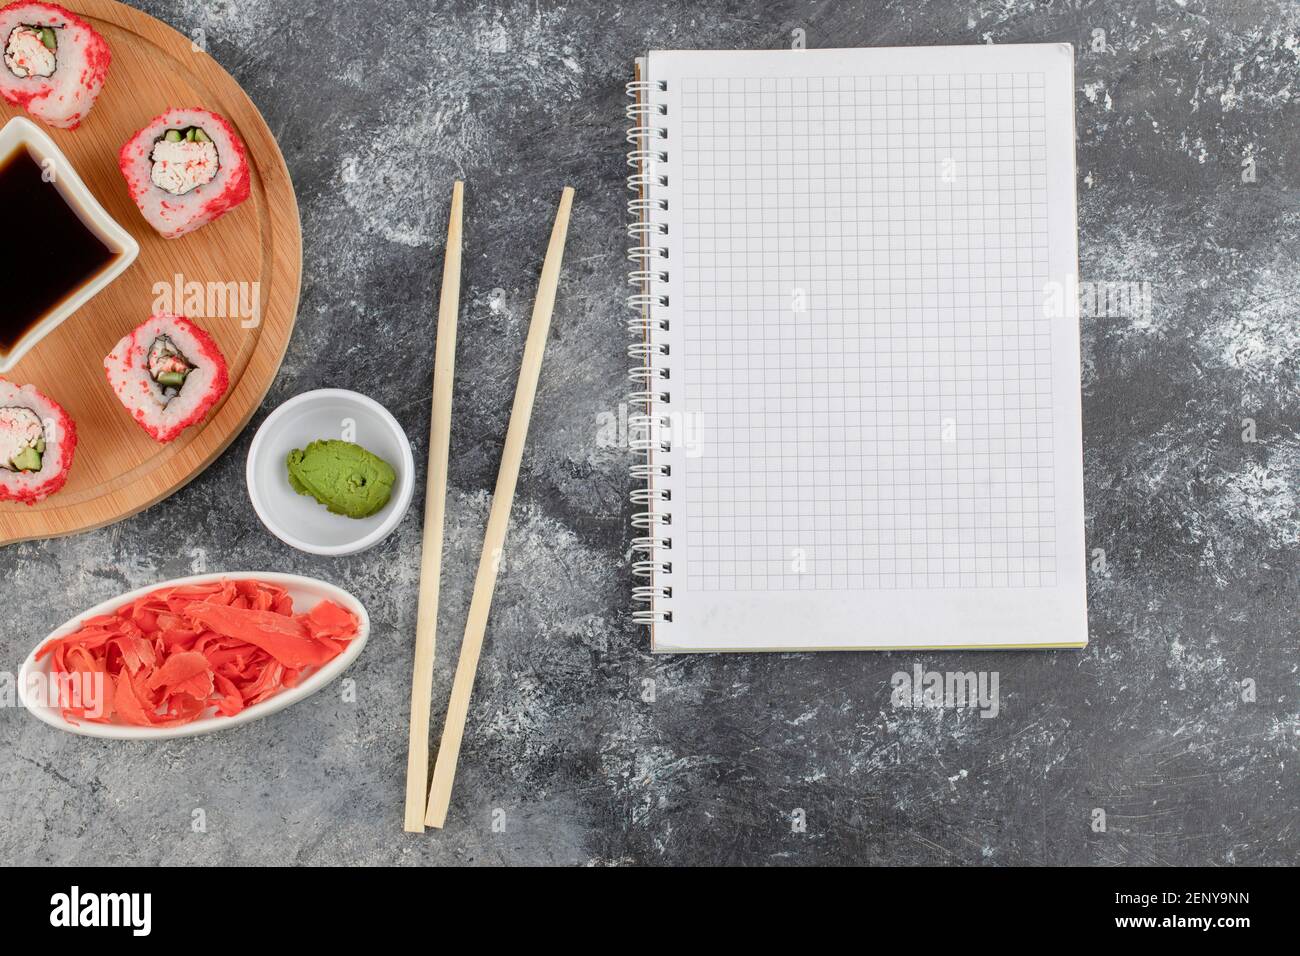 Tasty sushi rolls with red caviar on wooden board with notebook Stock Photo